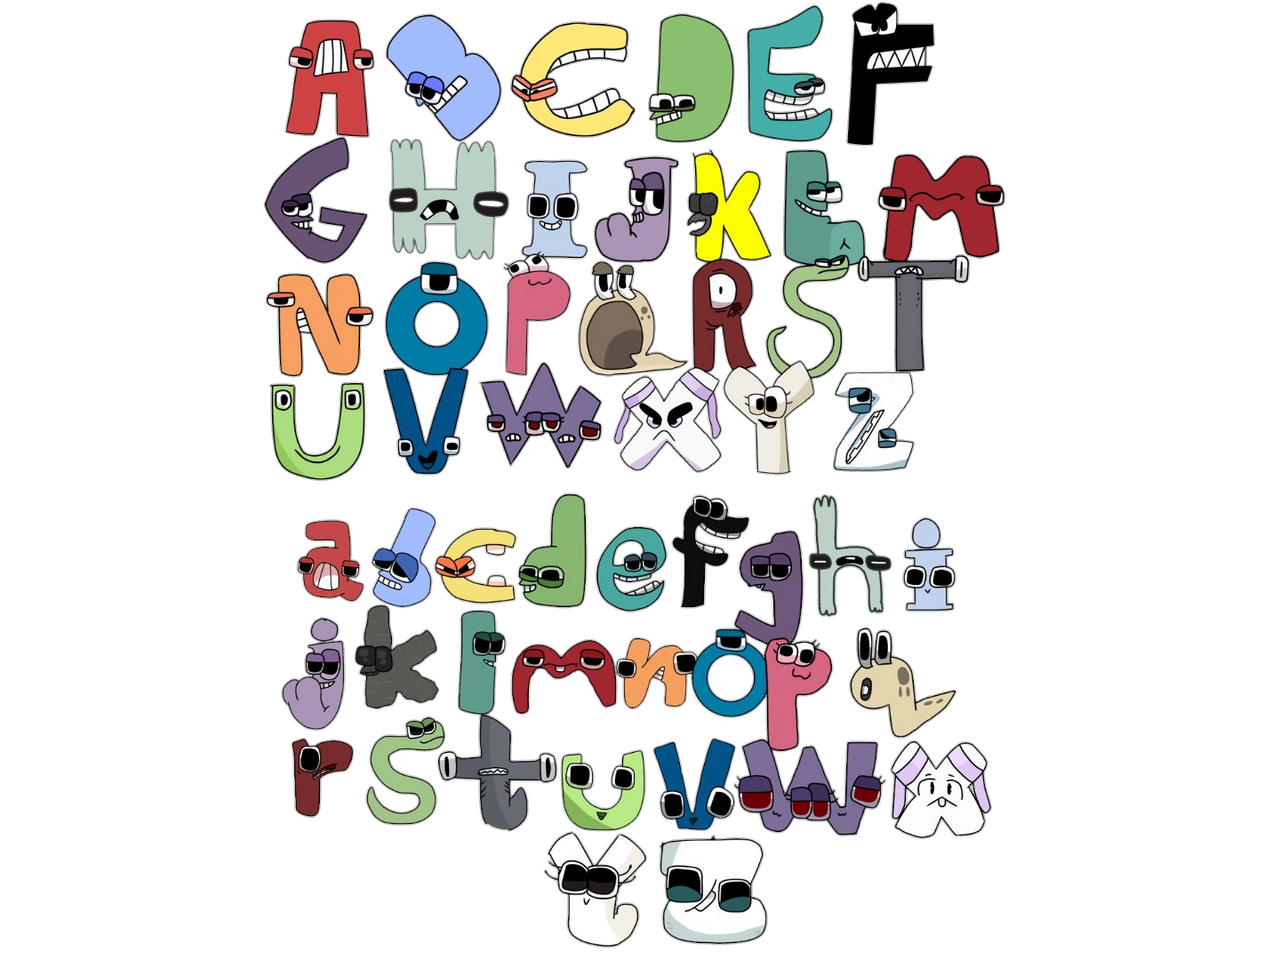 Lapartionese Alphabet Lore! (FANMADE) by TheBobby65 on DeviantArt